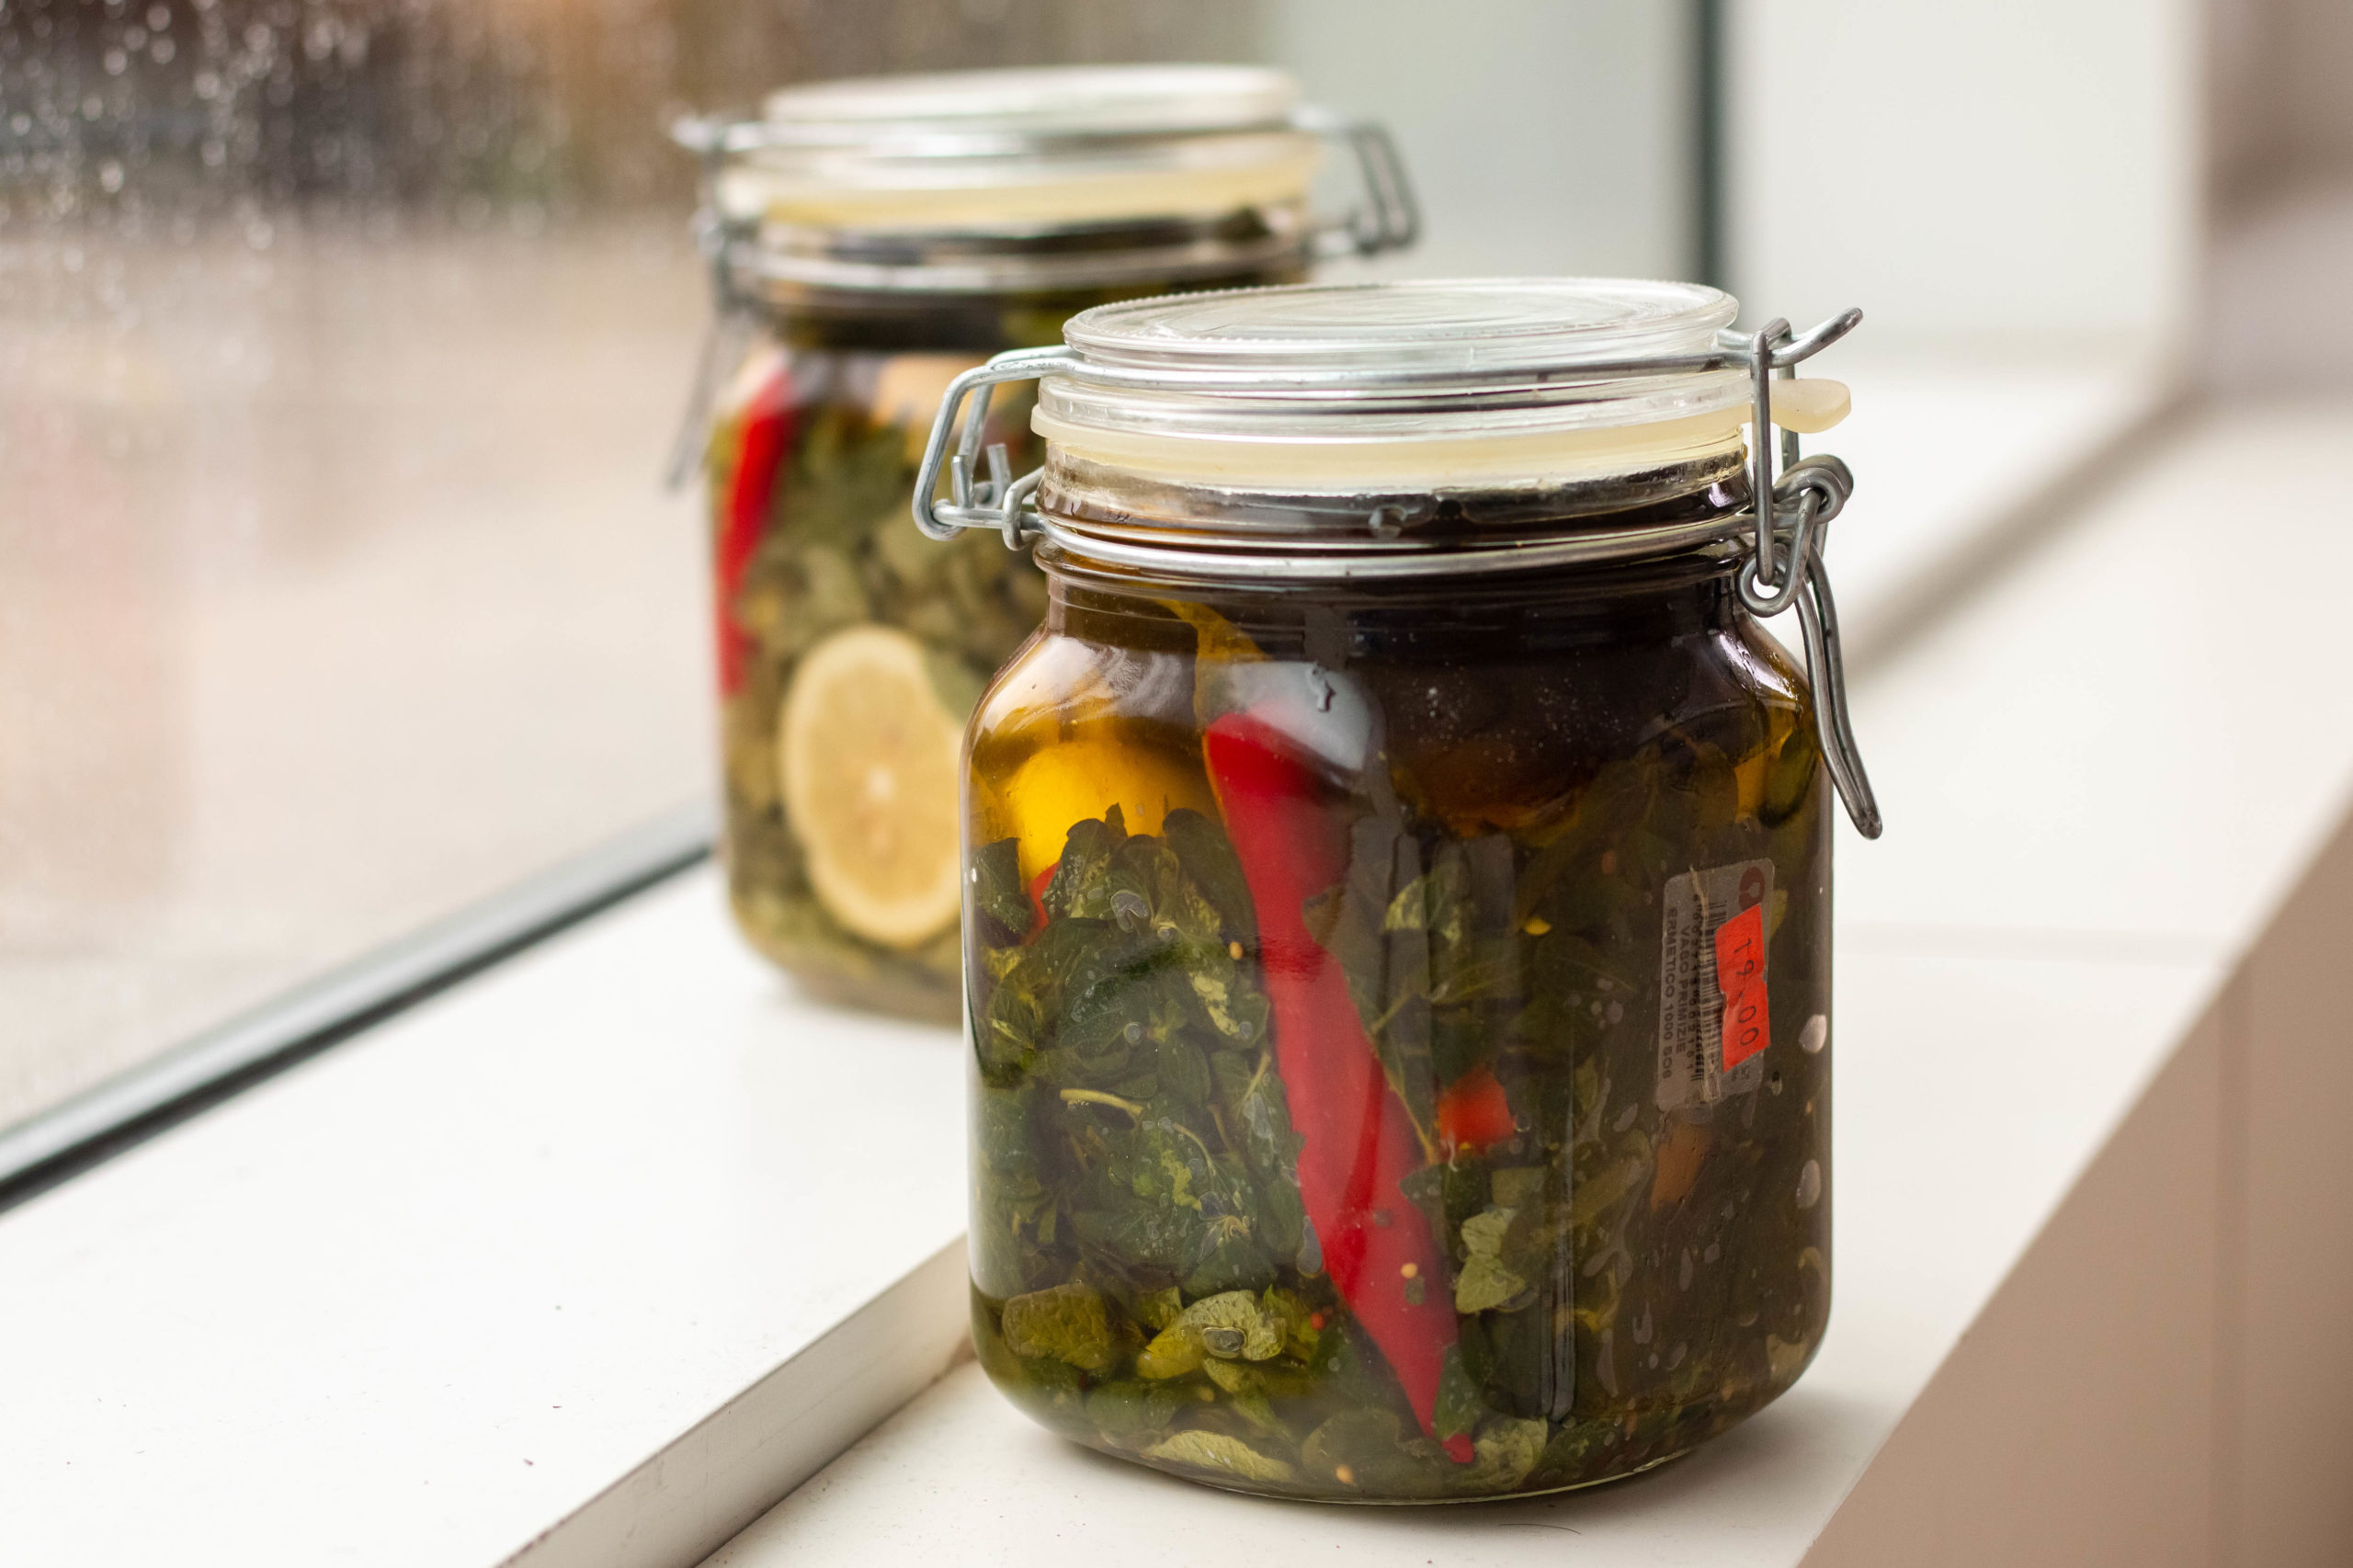 Glass jars with fresh za'atar leaves curing in oil with spices